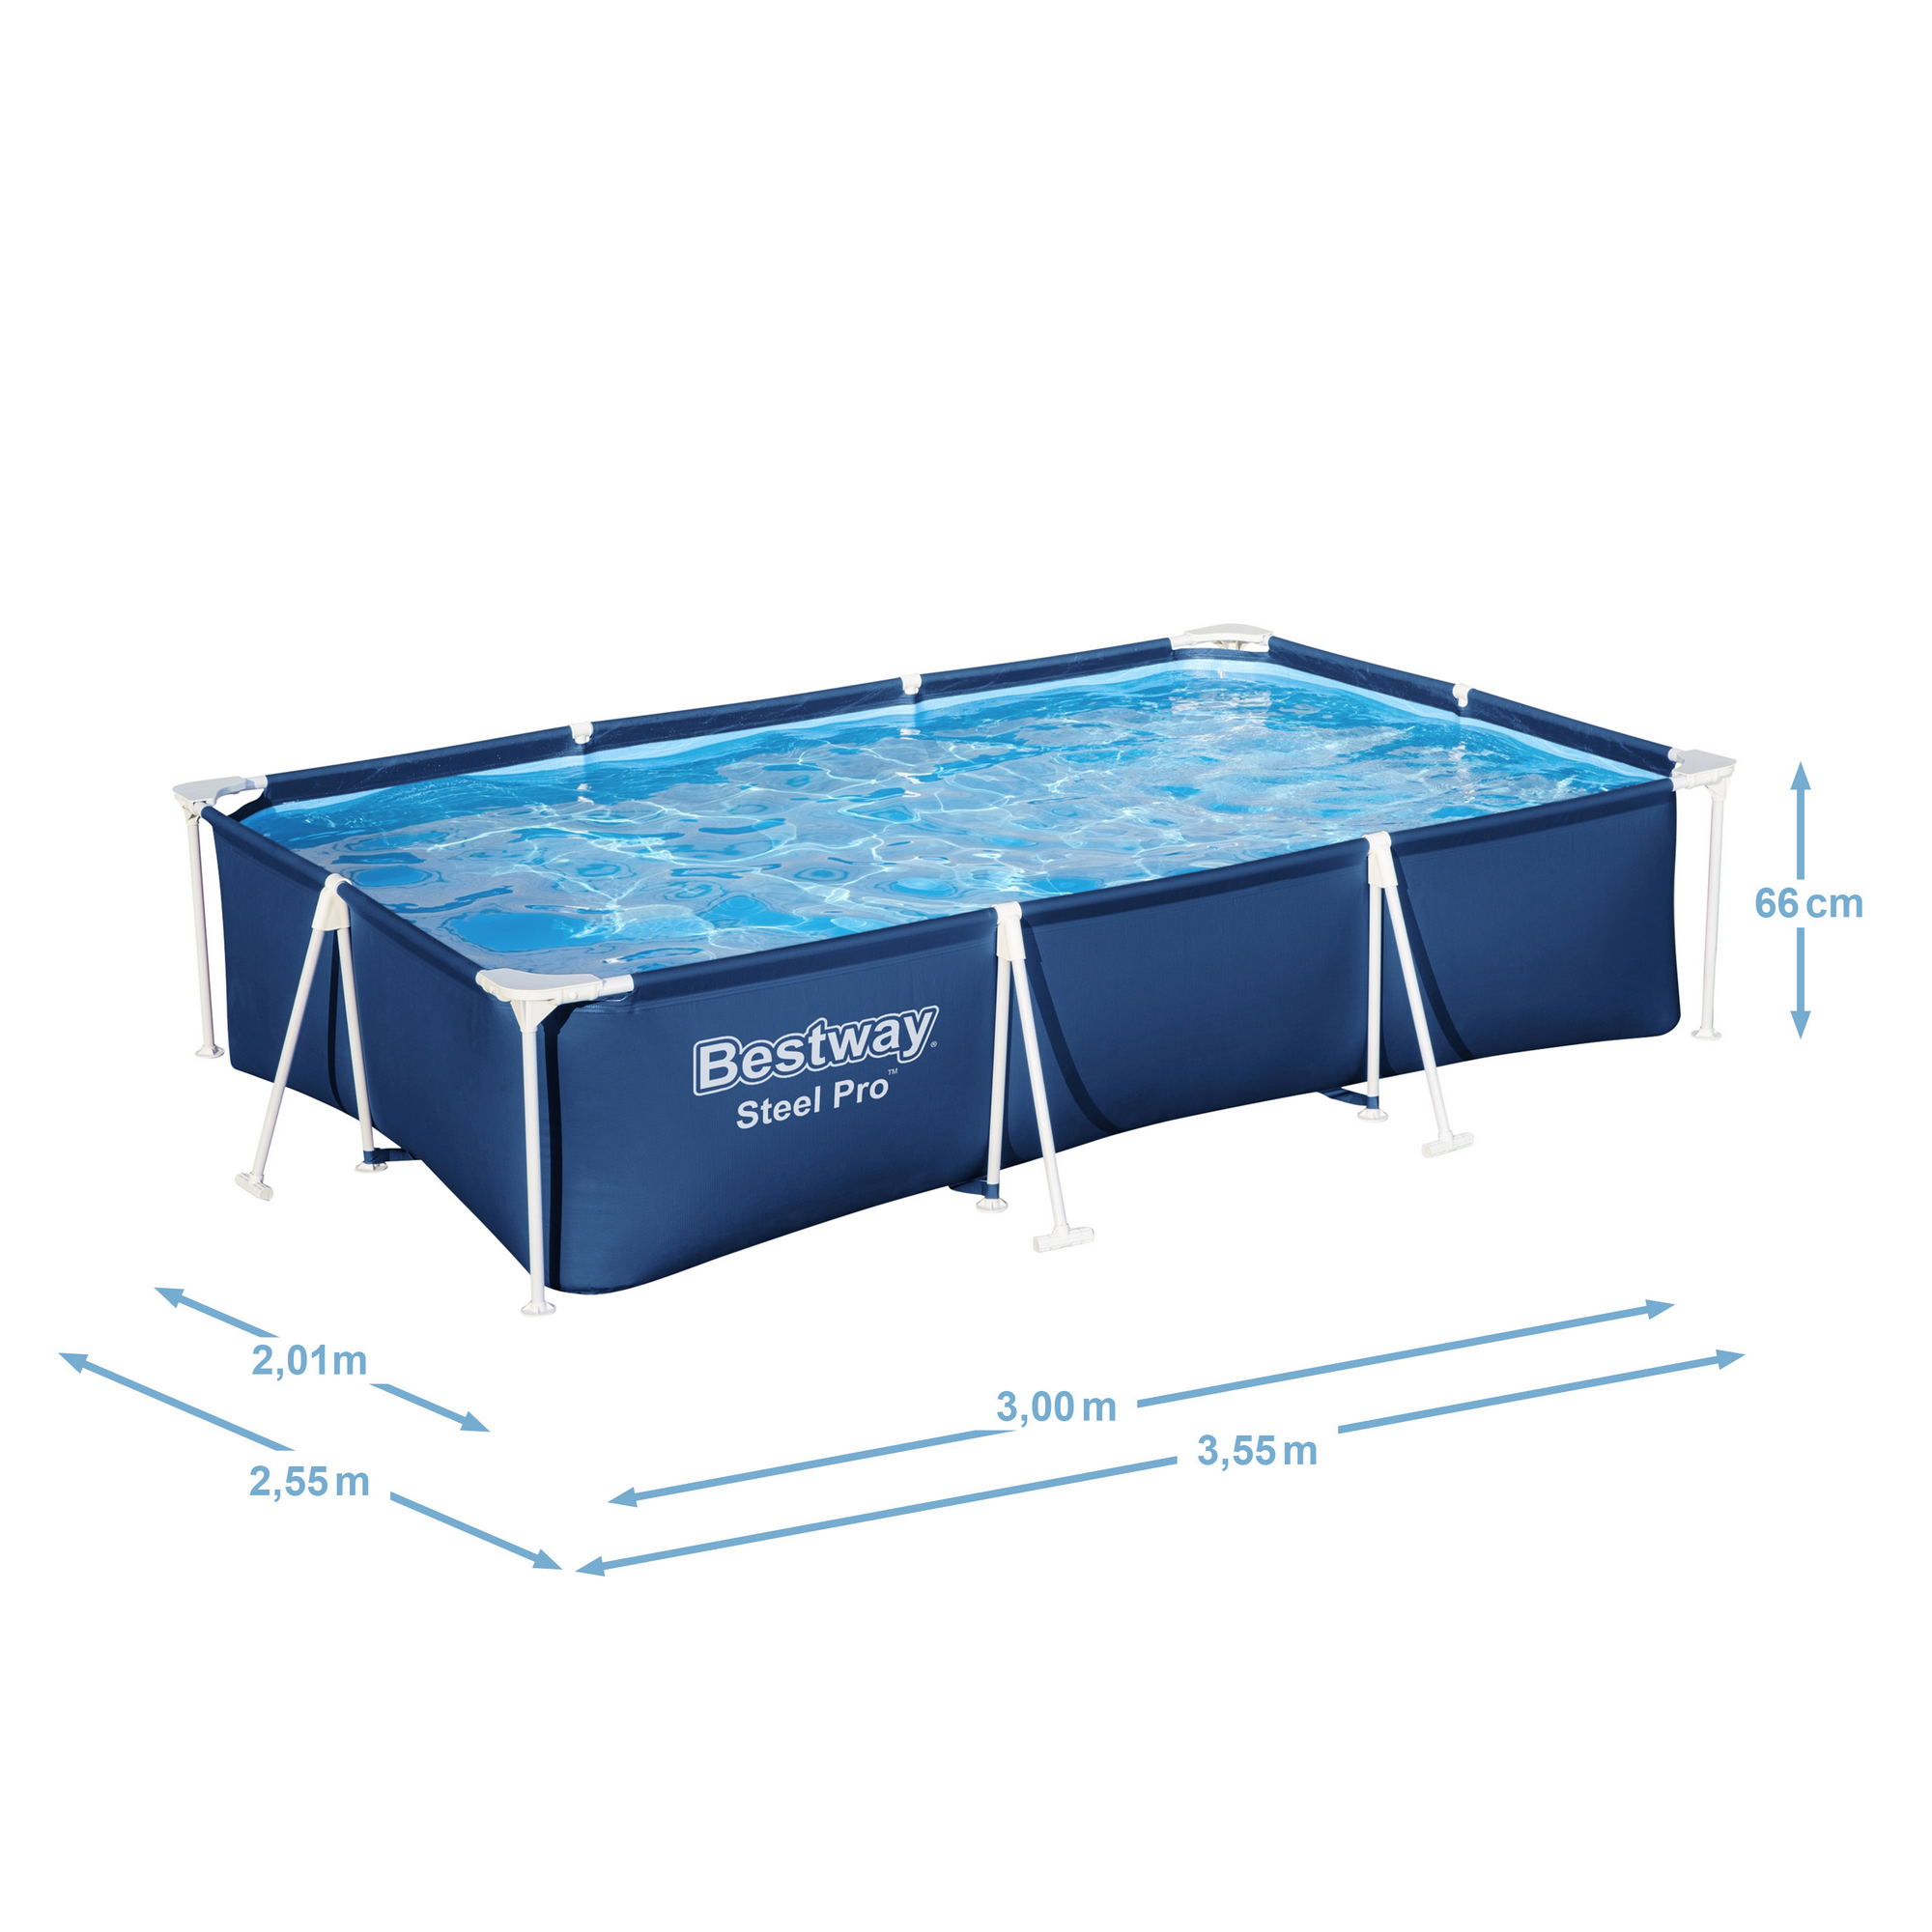 Frame-Pool 'Steel Pro' 300 x 201 x 66 cm + product picture